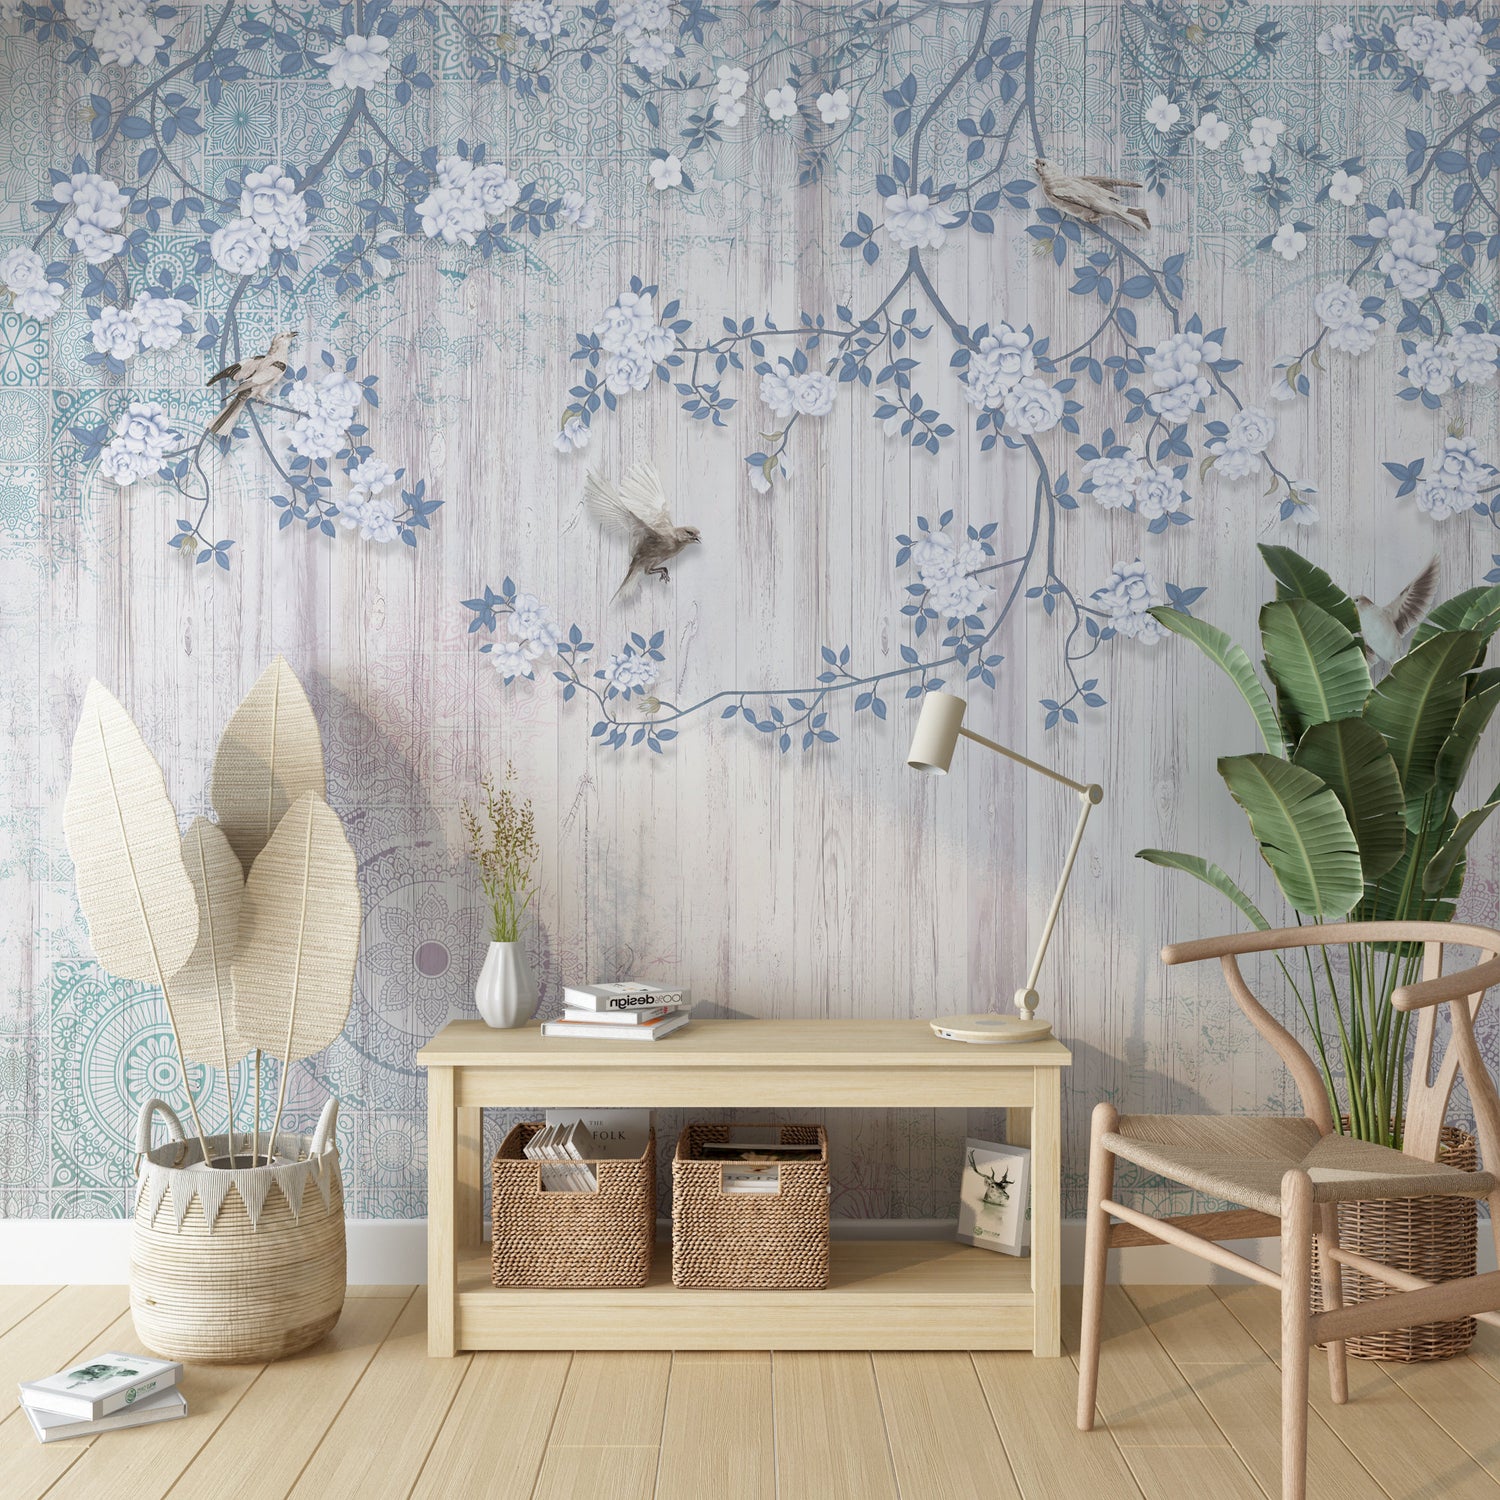 Chinoiserie Wallpaper, Birds and Flowers, Asian Wallpaper, Tree Wall Mural, Removable Wallpaper,